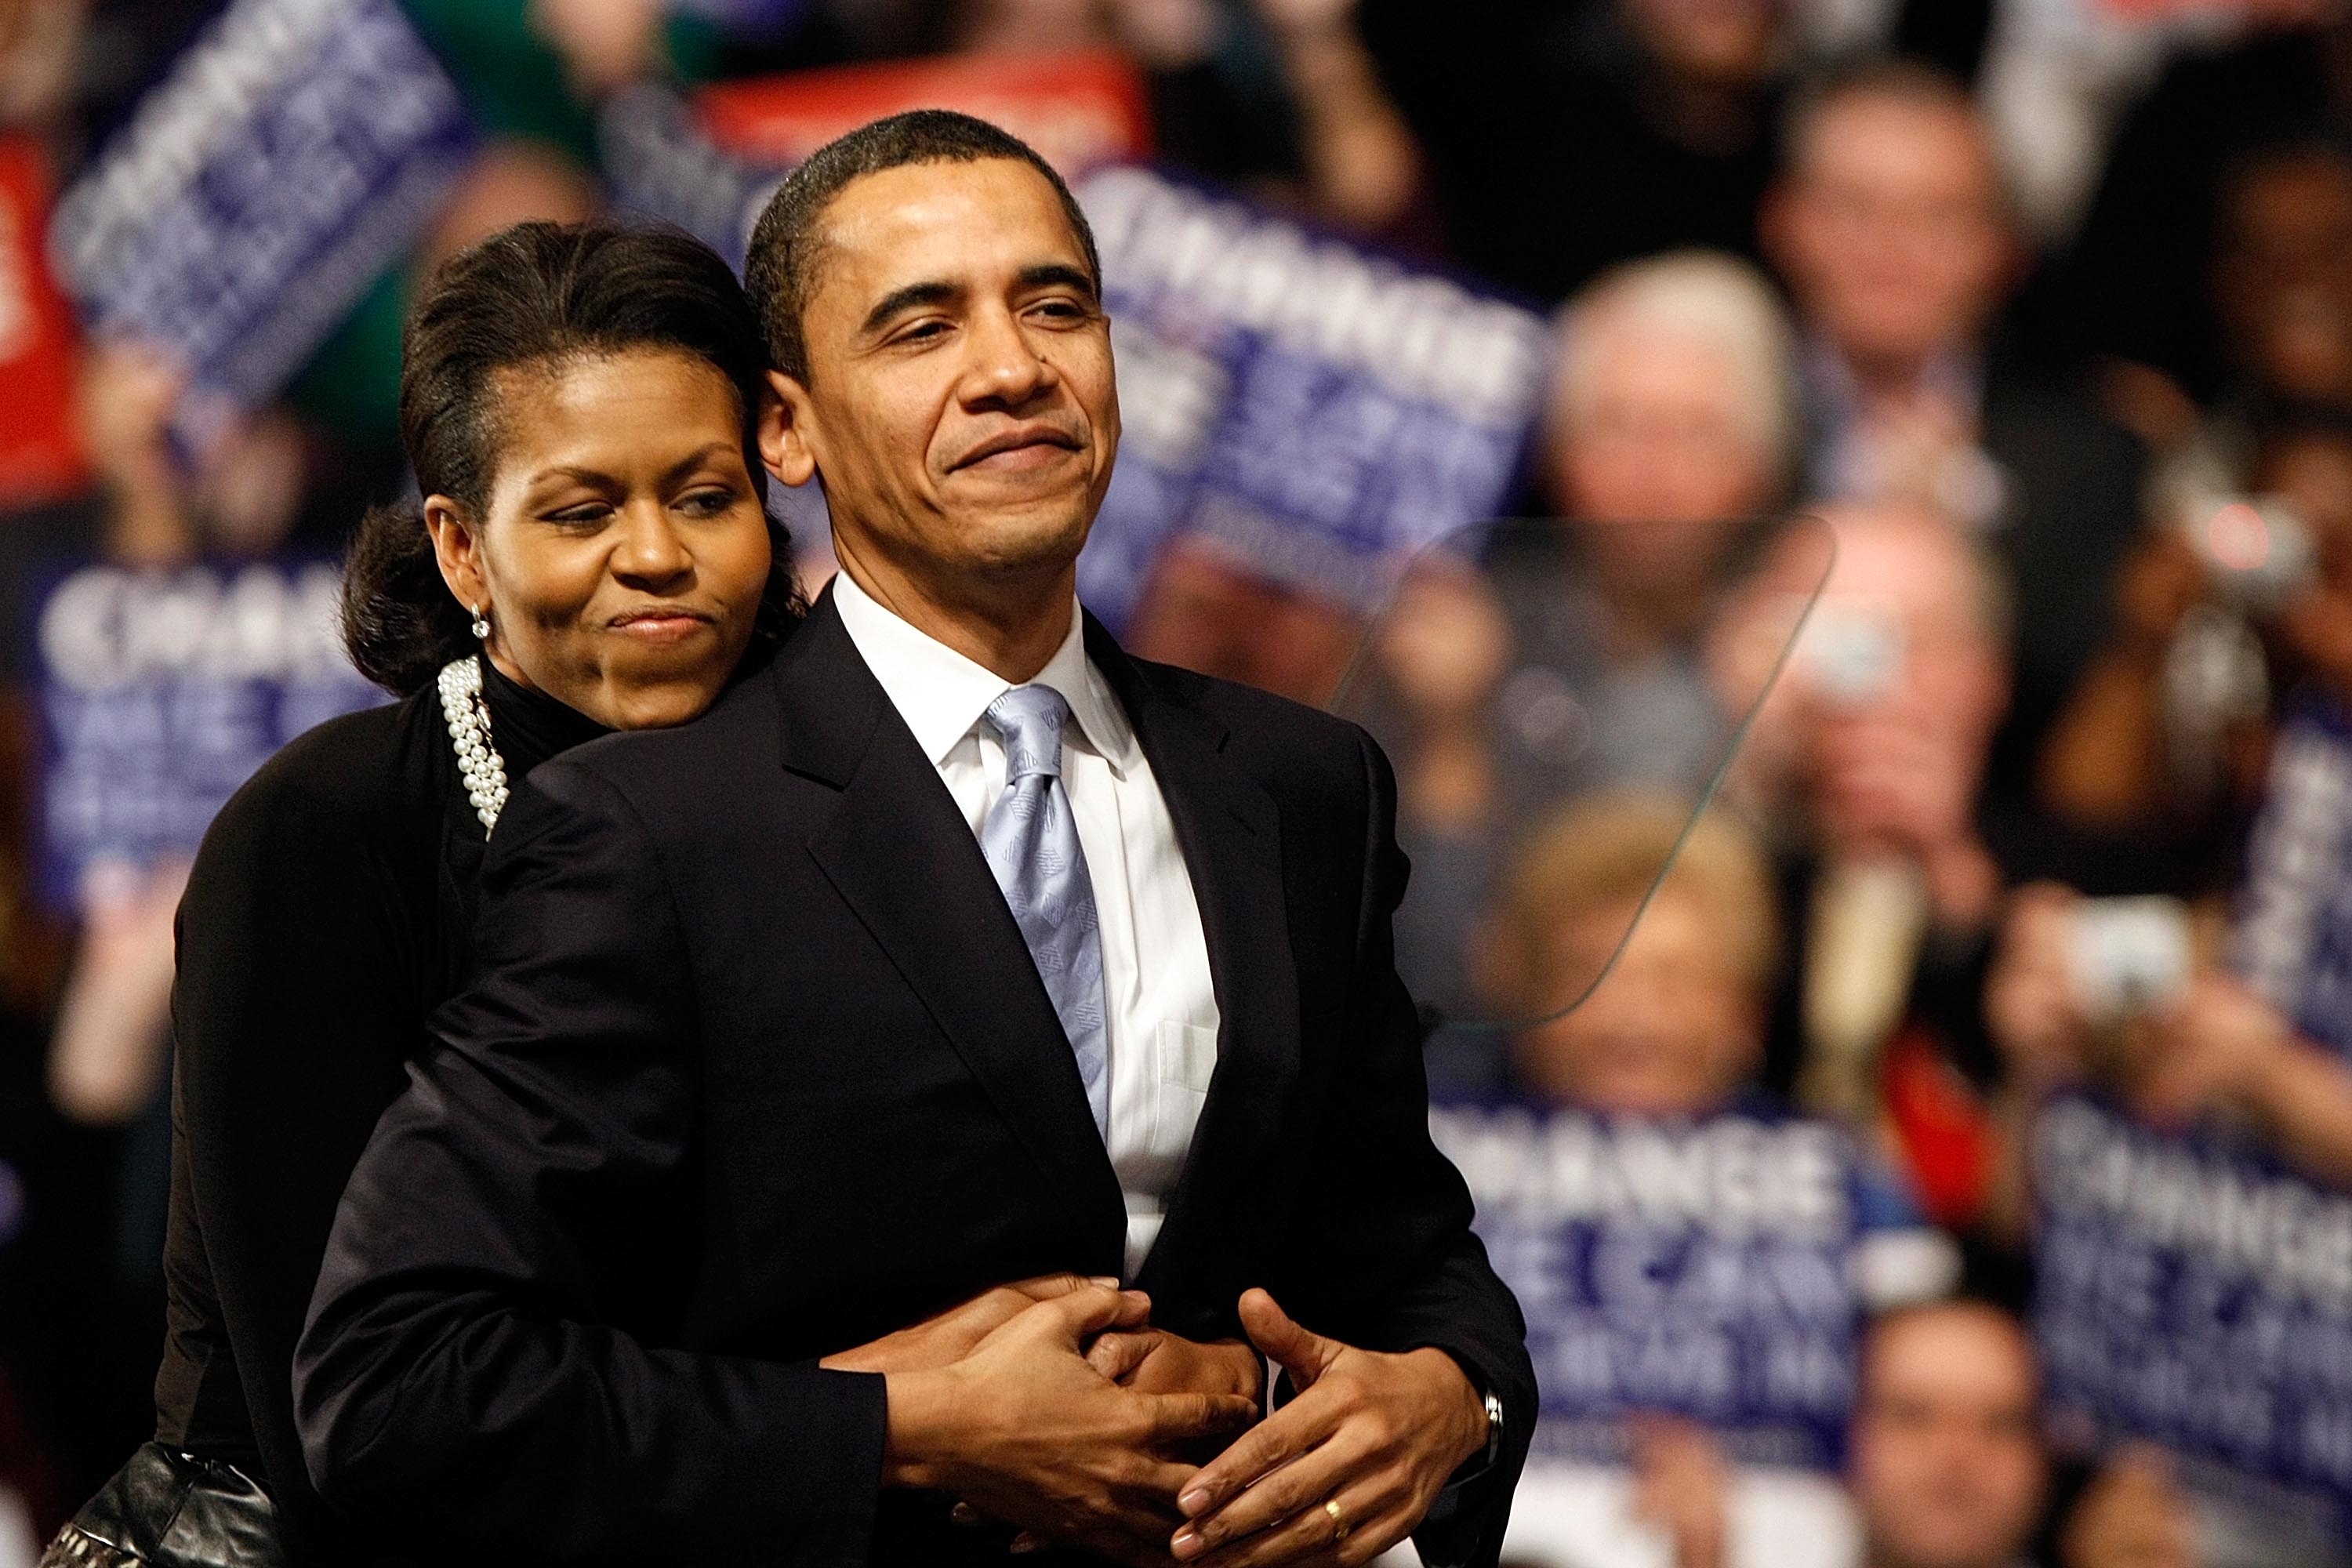 Barack Obama hugged by Michelle Obama before his speech at a primary night rally at the Nashua South High School on January 8, 2008 | Source: Getty Images